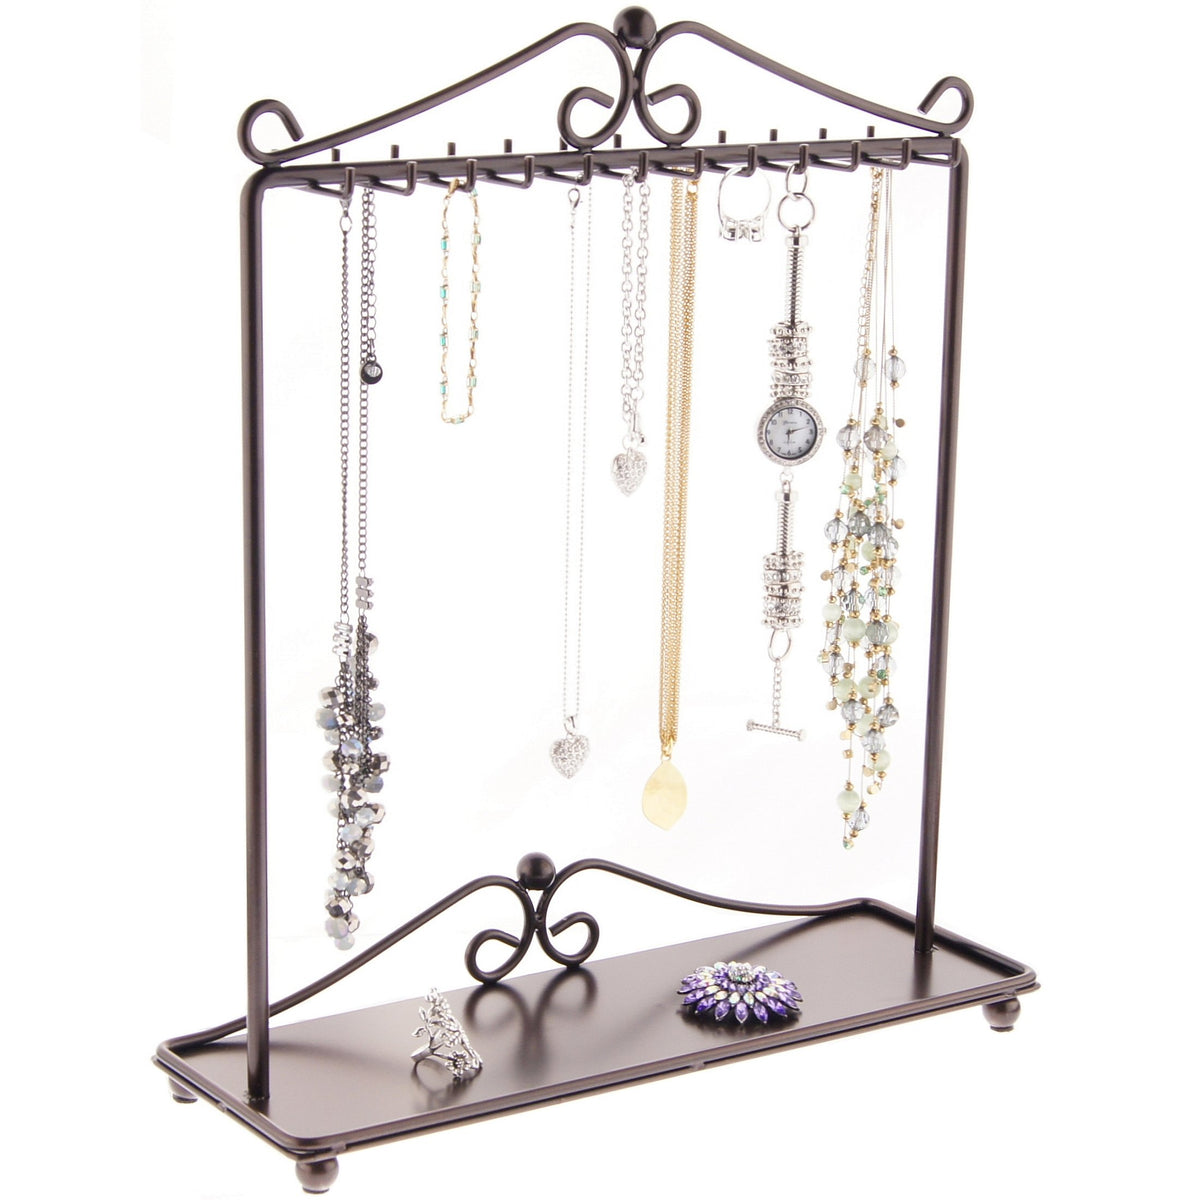 Angelynn's Tall Necklace Holder Organizer Rack Hanging Jewelry Display Tree Stand, Calla Rubbed Bronze